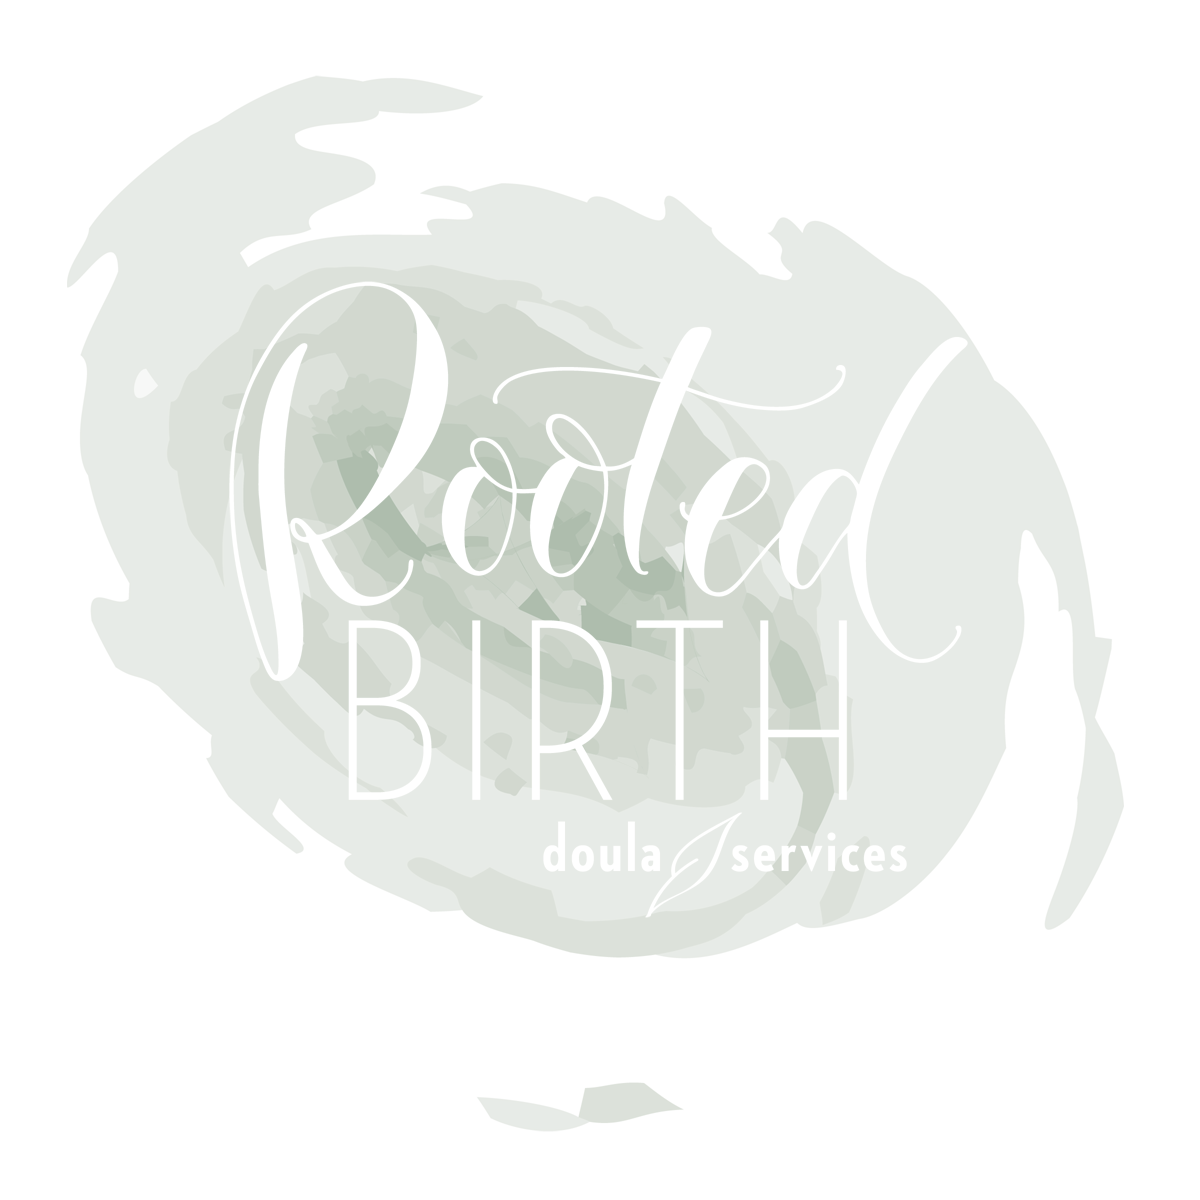 Rooted Birth Doula Services